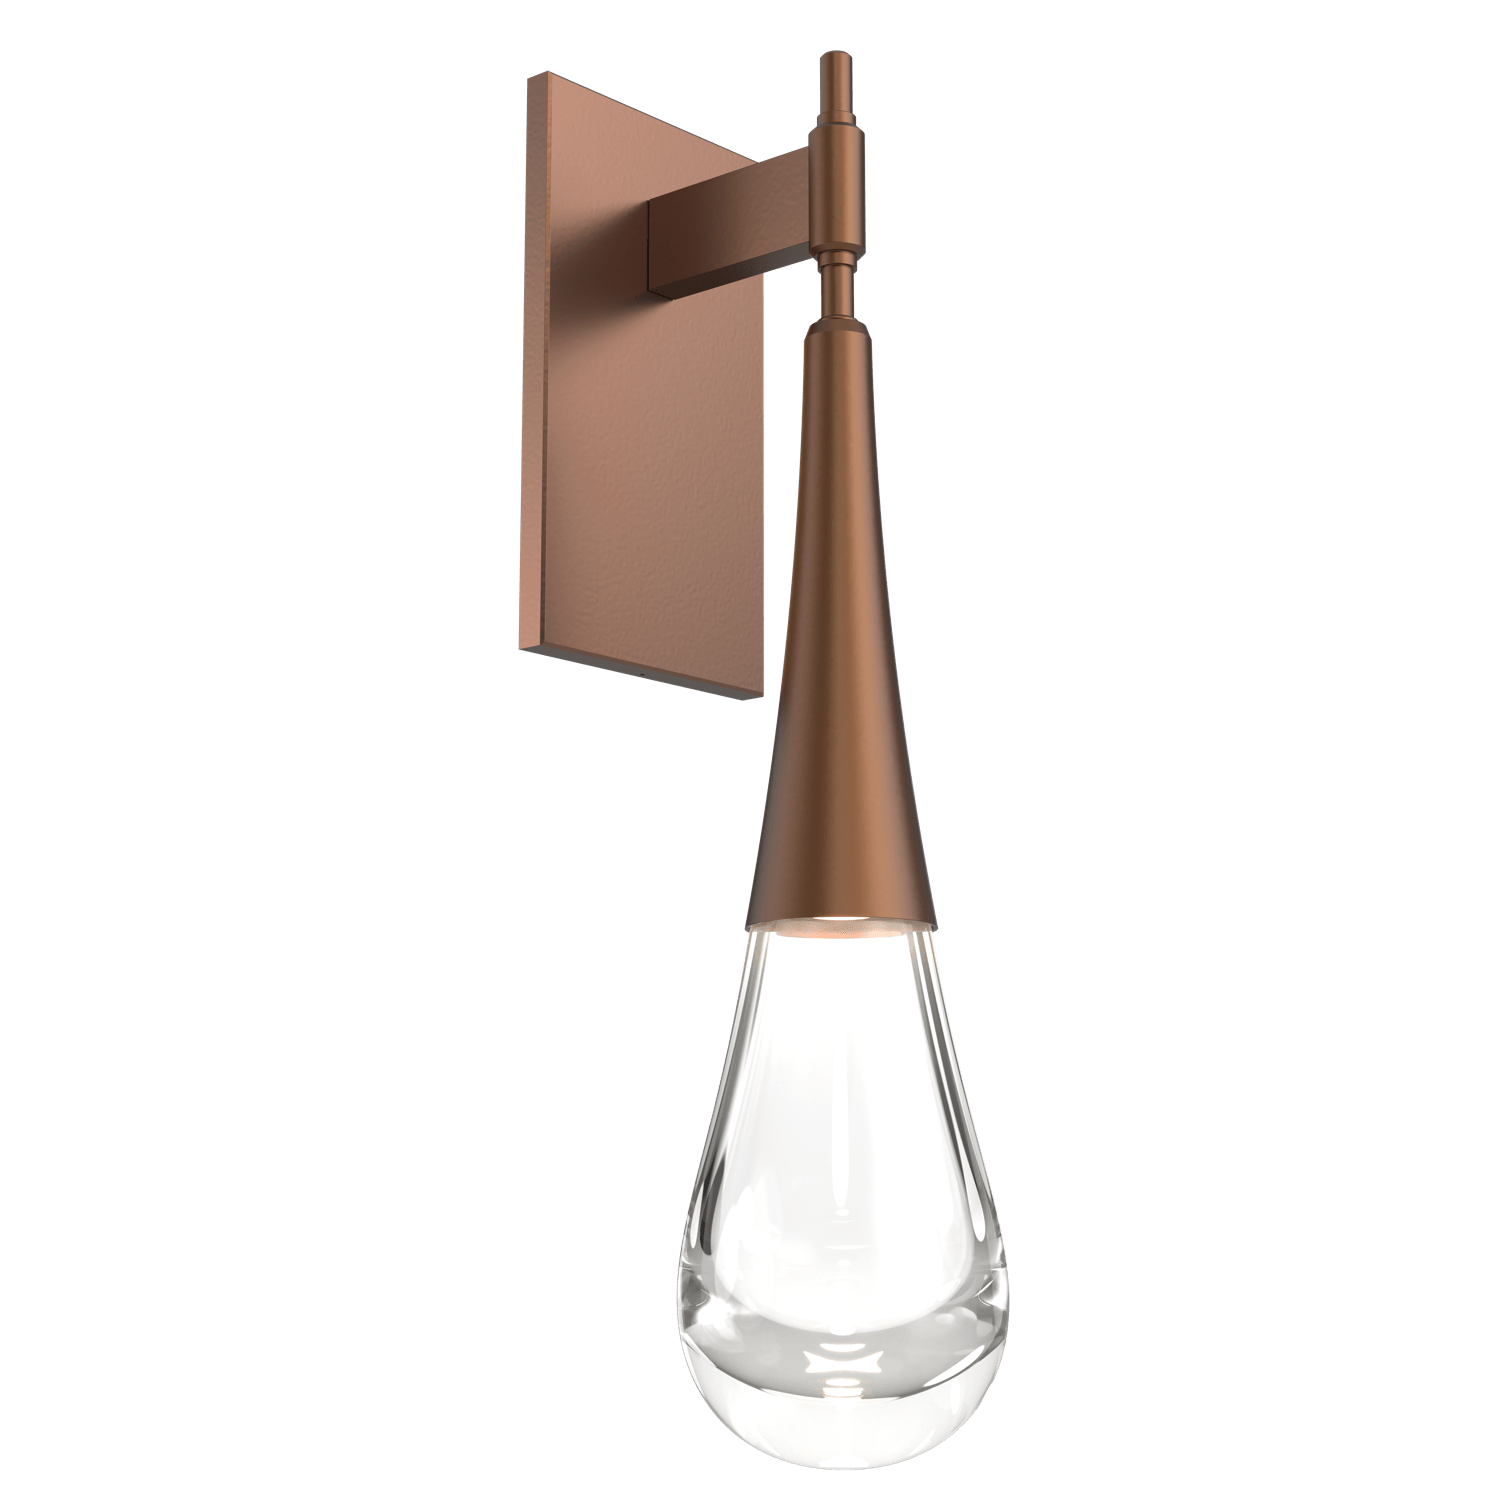 IDB0078-01-BB-Hammerton-Studio-Raindrop-wall-sconce-with-burnished-bronze-finish-and-clear-blown-glass-shades-and-LED-lamping